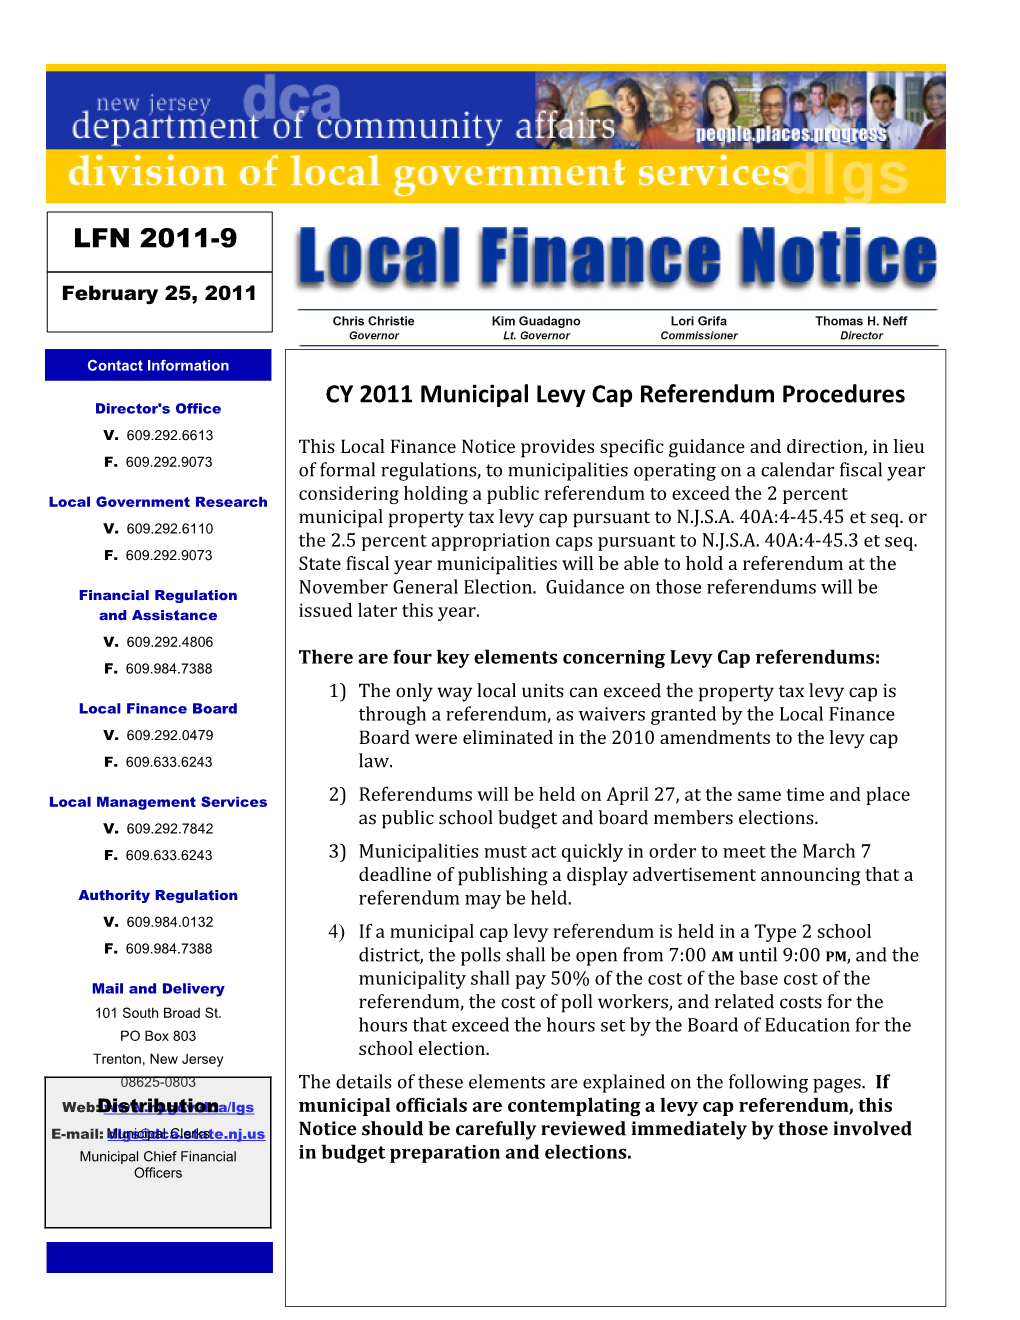 Local Finance Notice 2011-9 February 28, 2011 Page 2